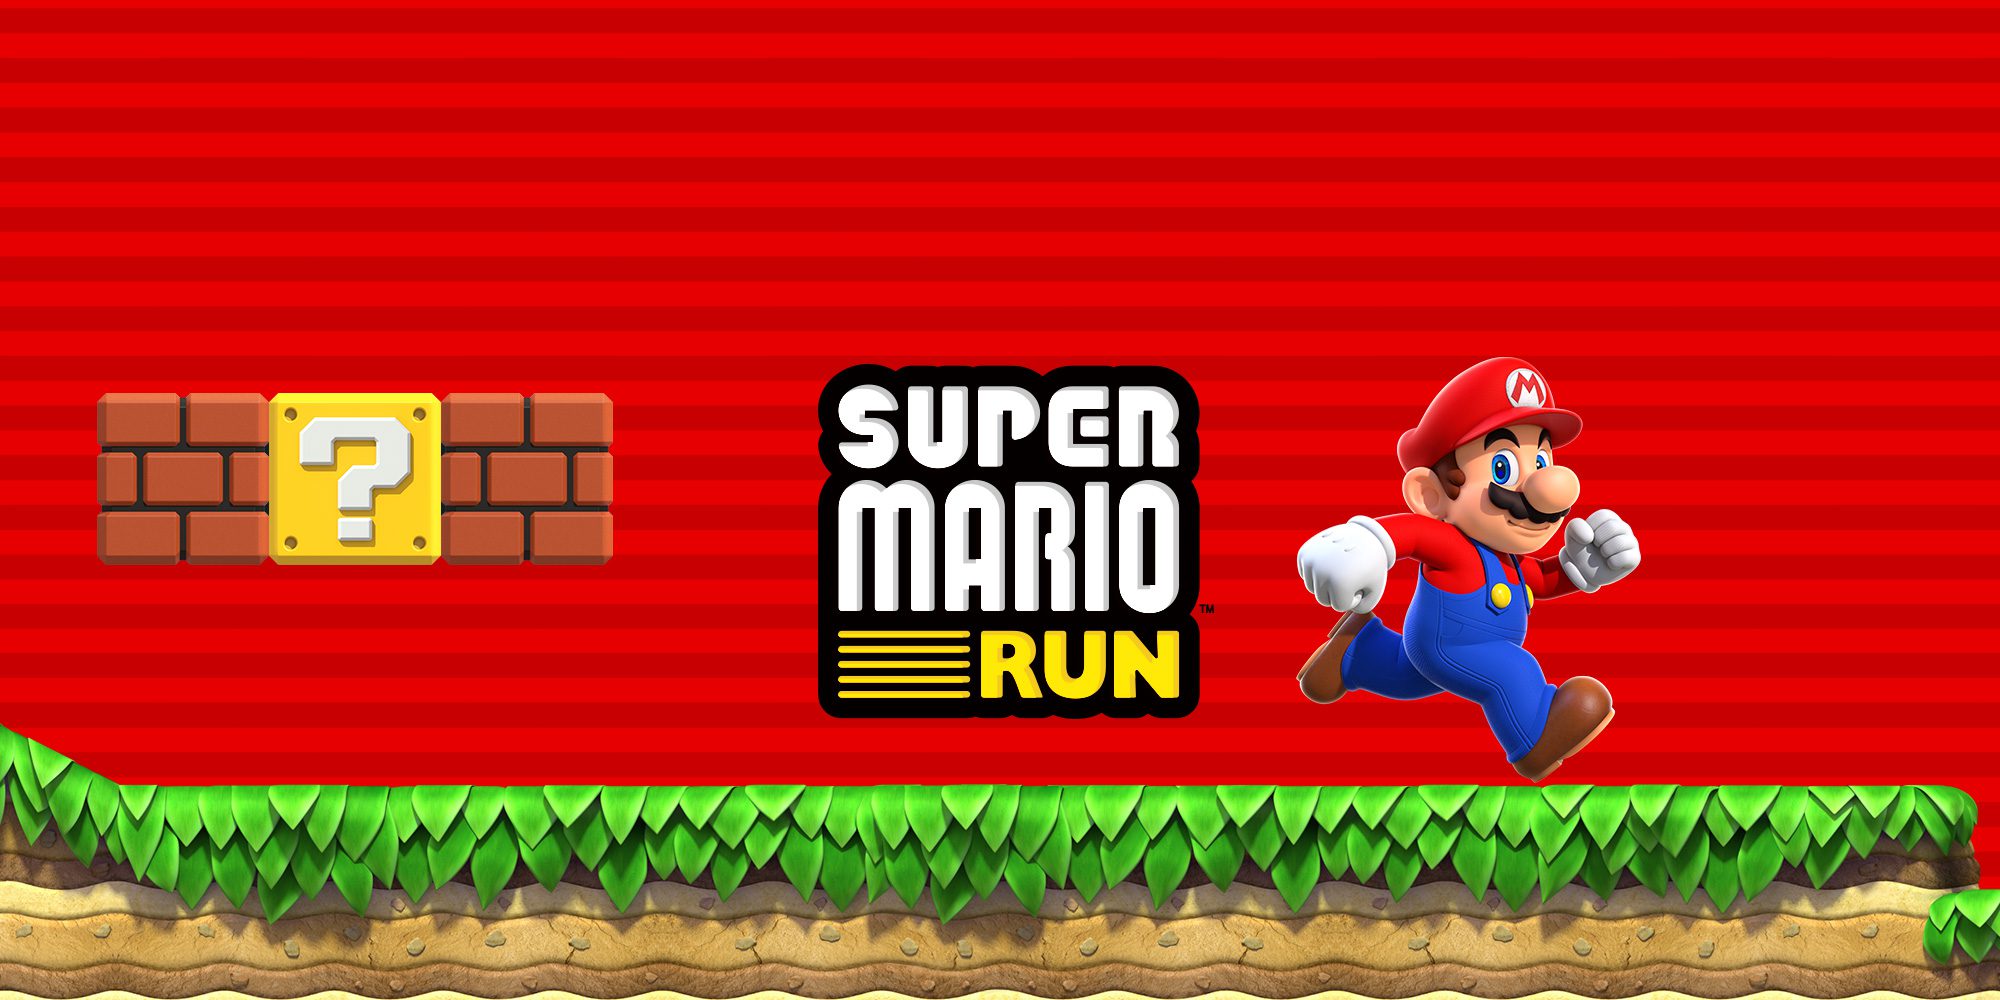 Super Mario Run Updated With New Courses, Price Drop to $5